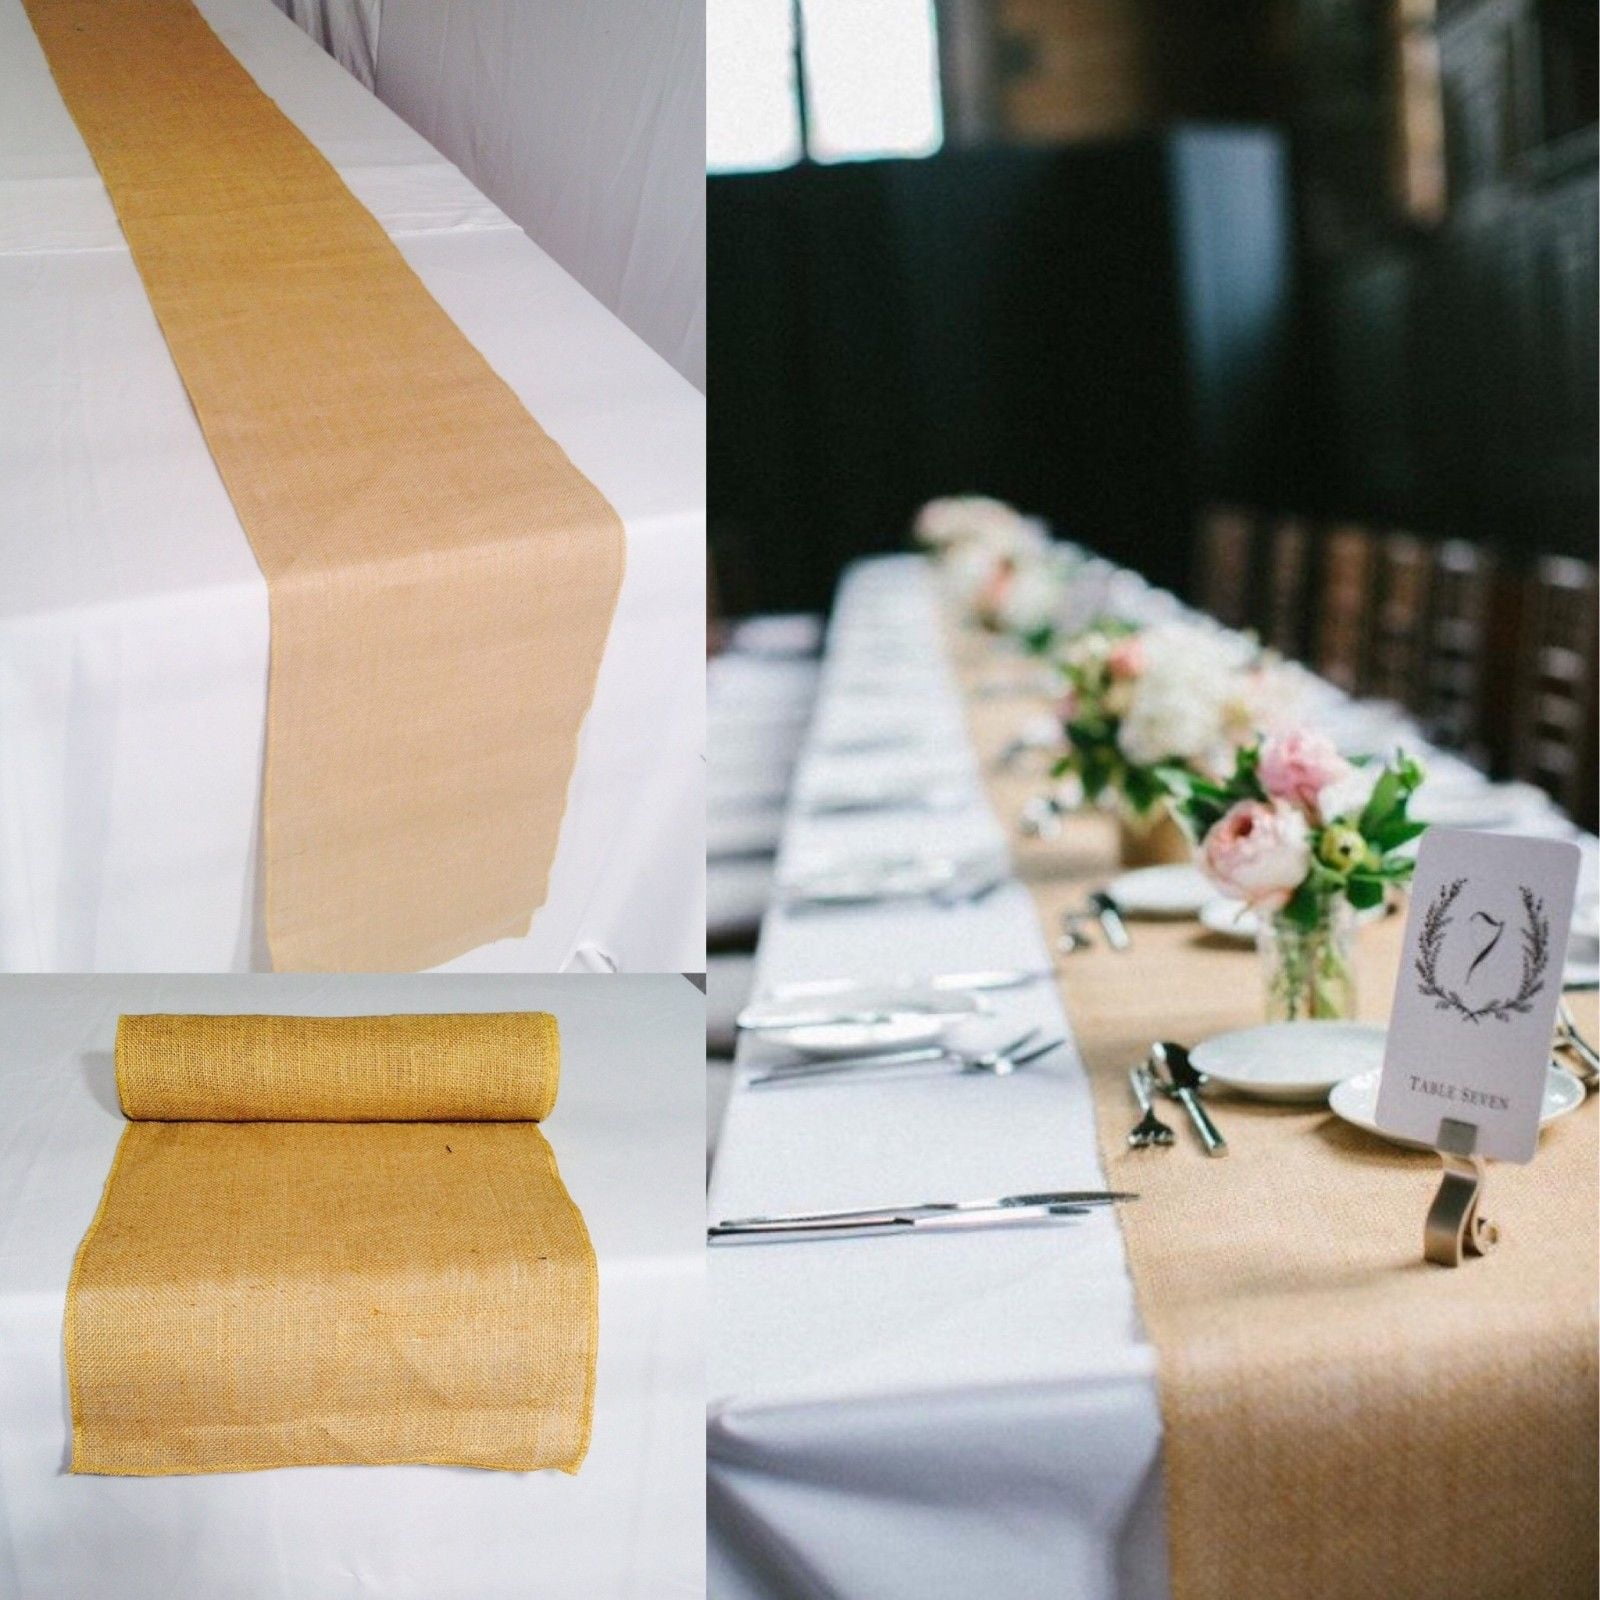 25 Burlap Table Runners 18" x 120" Extra Wide Wedding Event 100% Natural Jute 